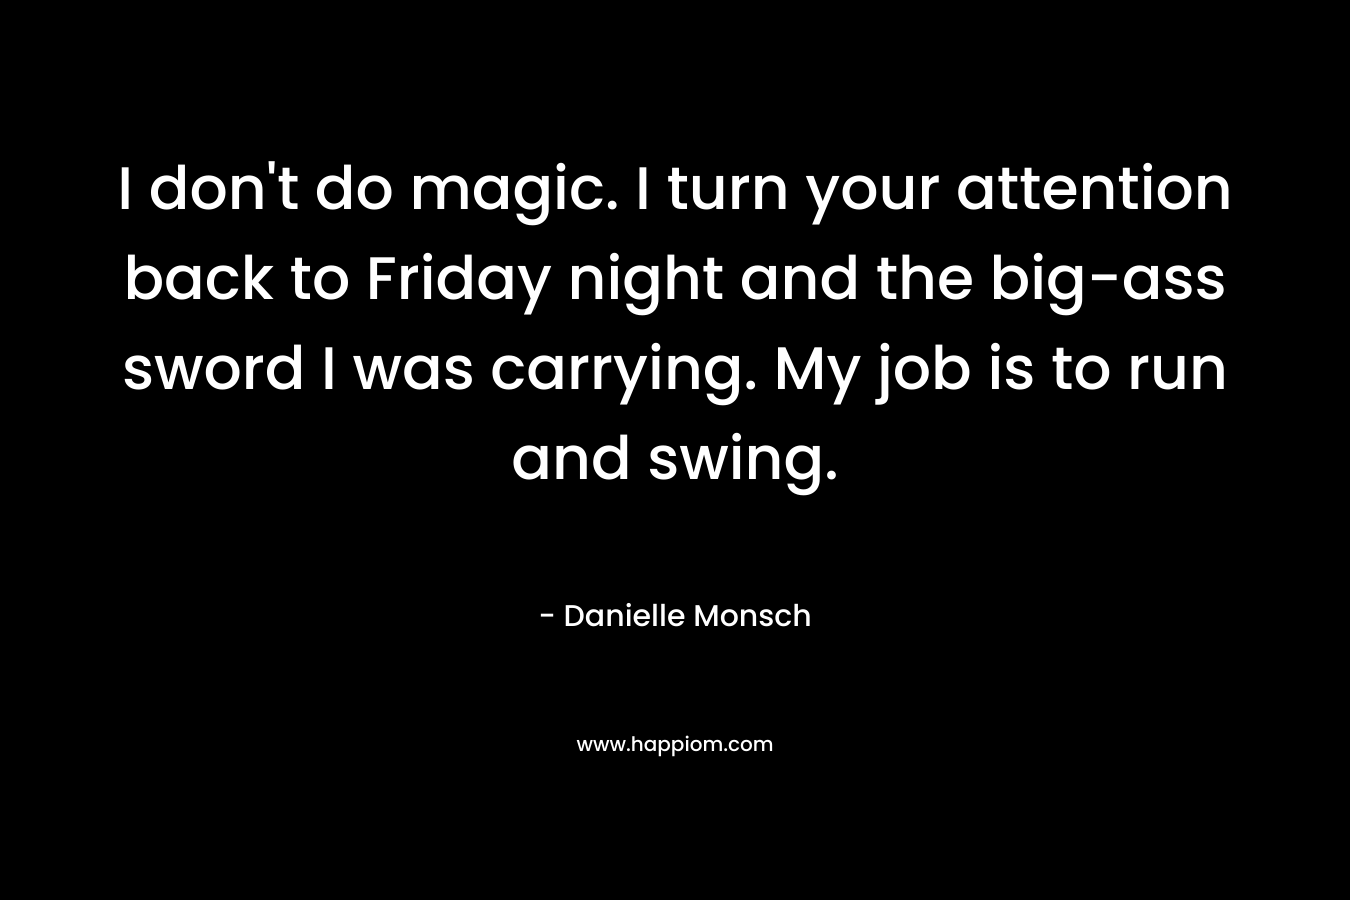 I don’t do magic. I turn your attention back to Friday night and the big-ass sword I was carrying. My job is to run and swing. – Danielle Monsch